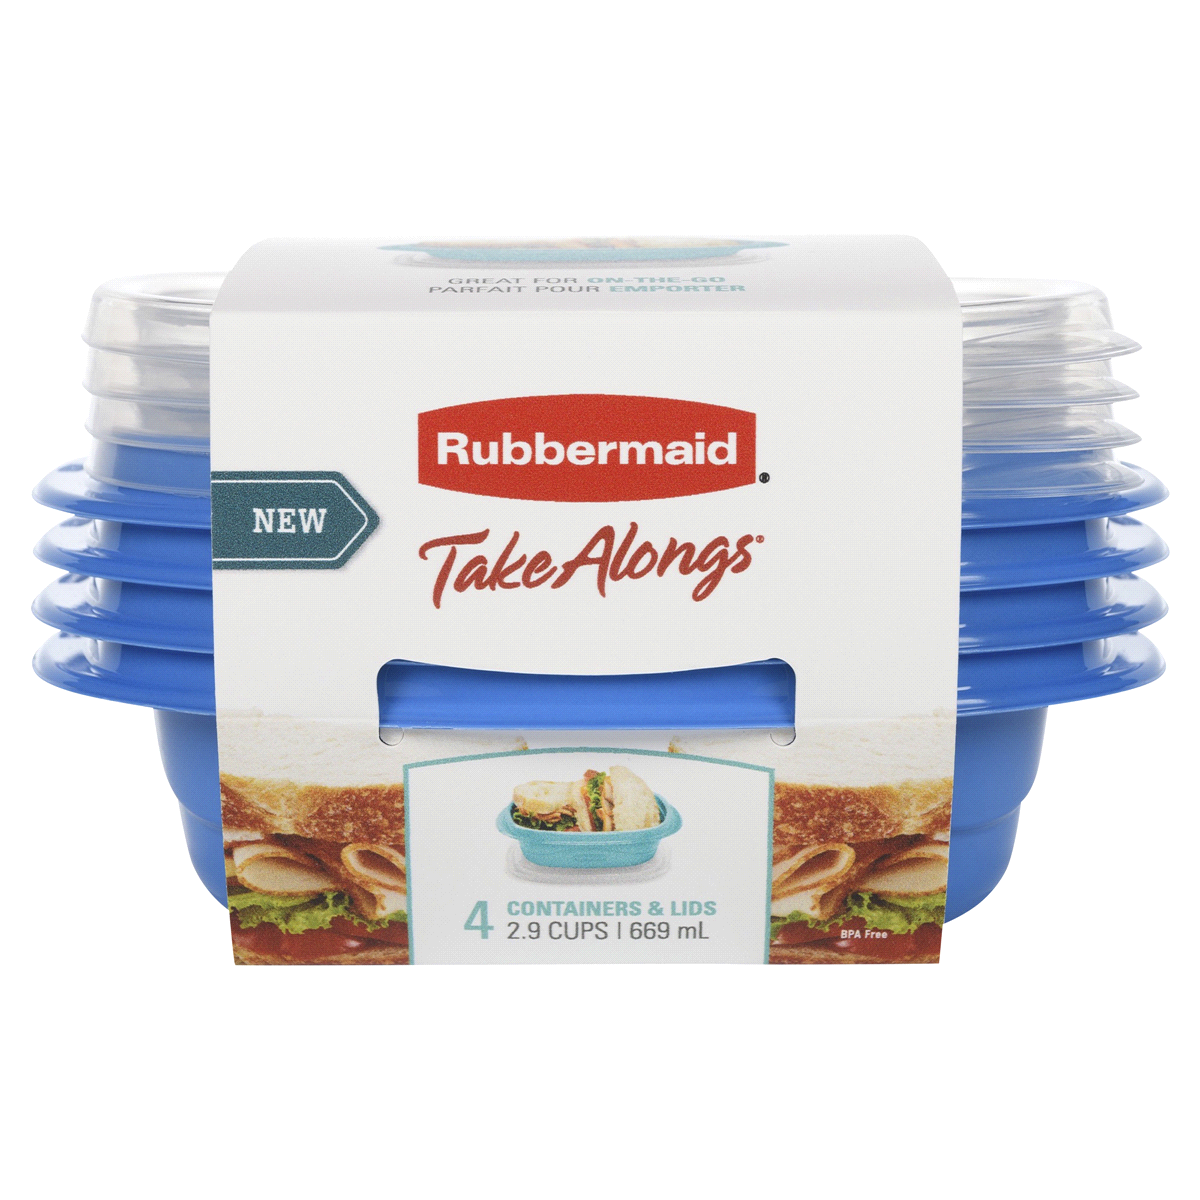 Rubbermaid Take Along's Split Sandwich Food Storage Containers 3.7 Cup 3  Pack